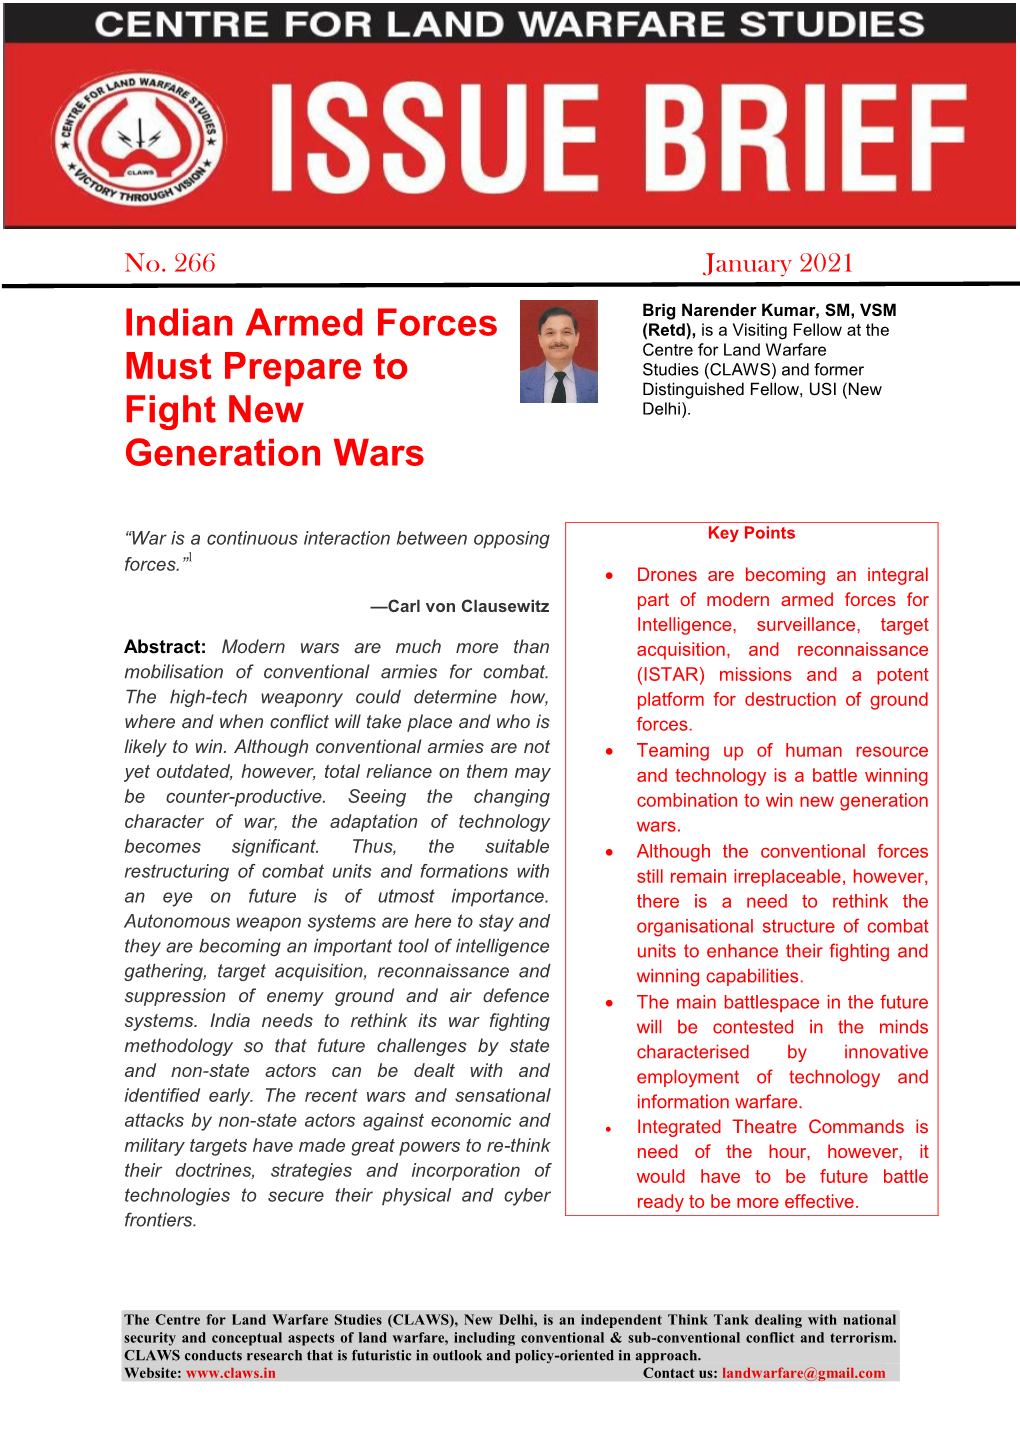 Indian Armed Forces Must Prepare to Fight New Generation Wars